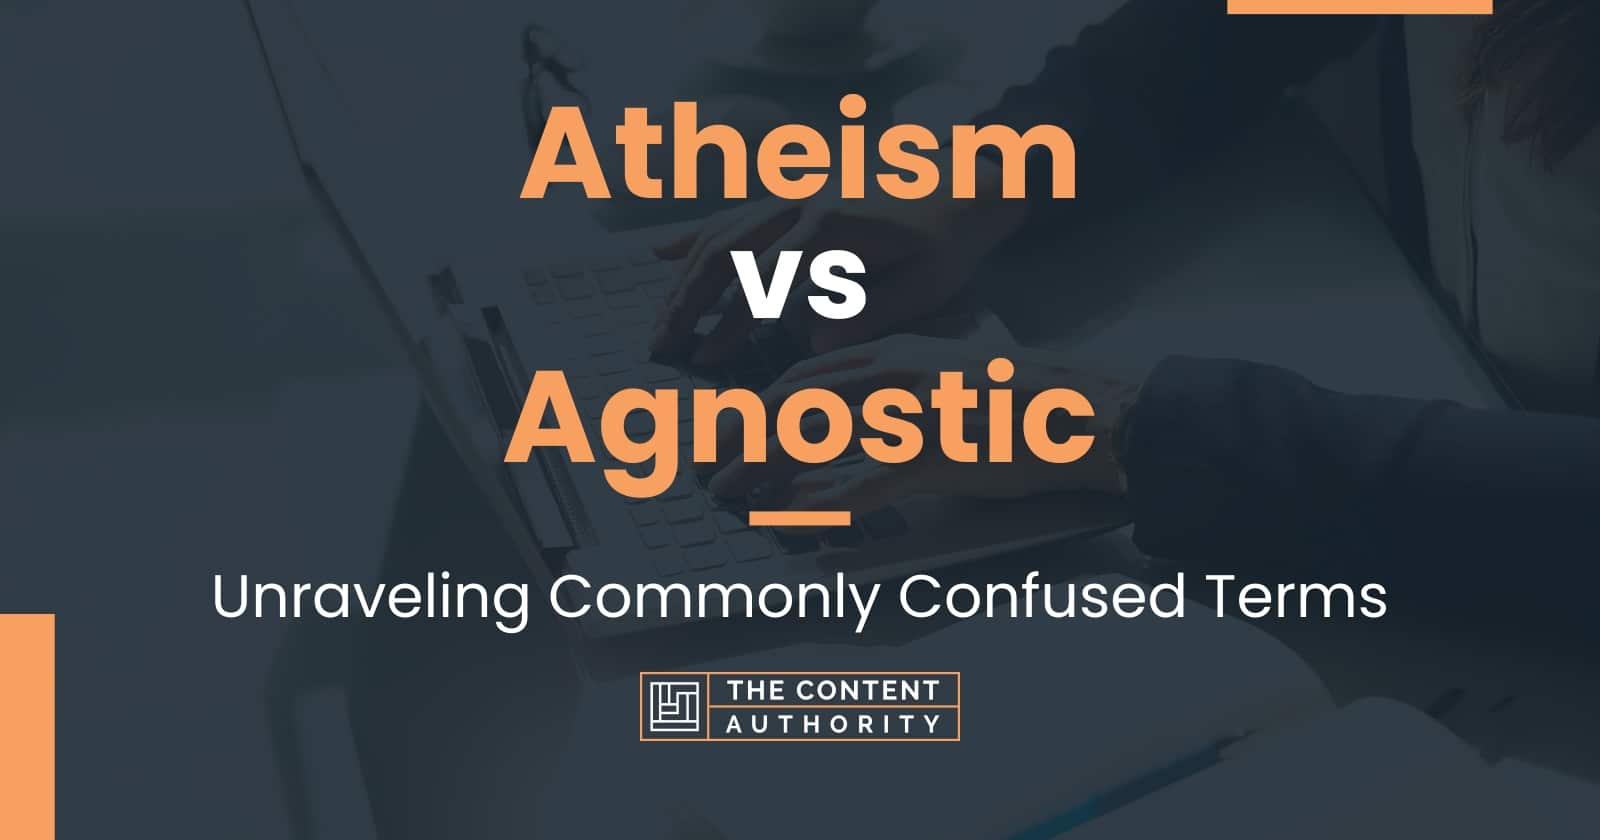 Atheism Vs Agnostic Unraveling Commonly Confused Terms